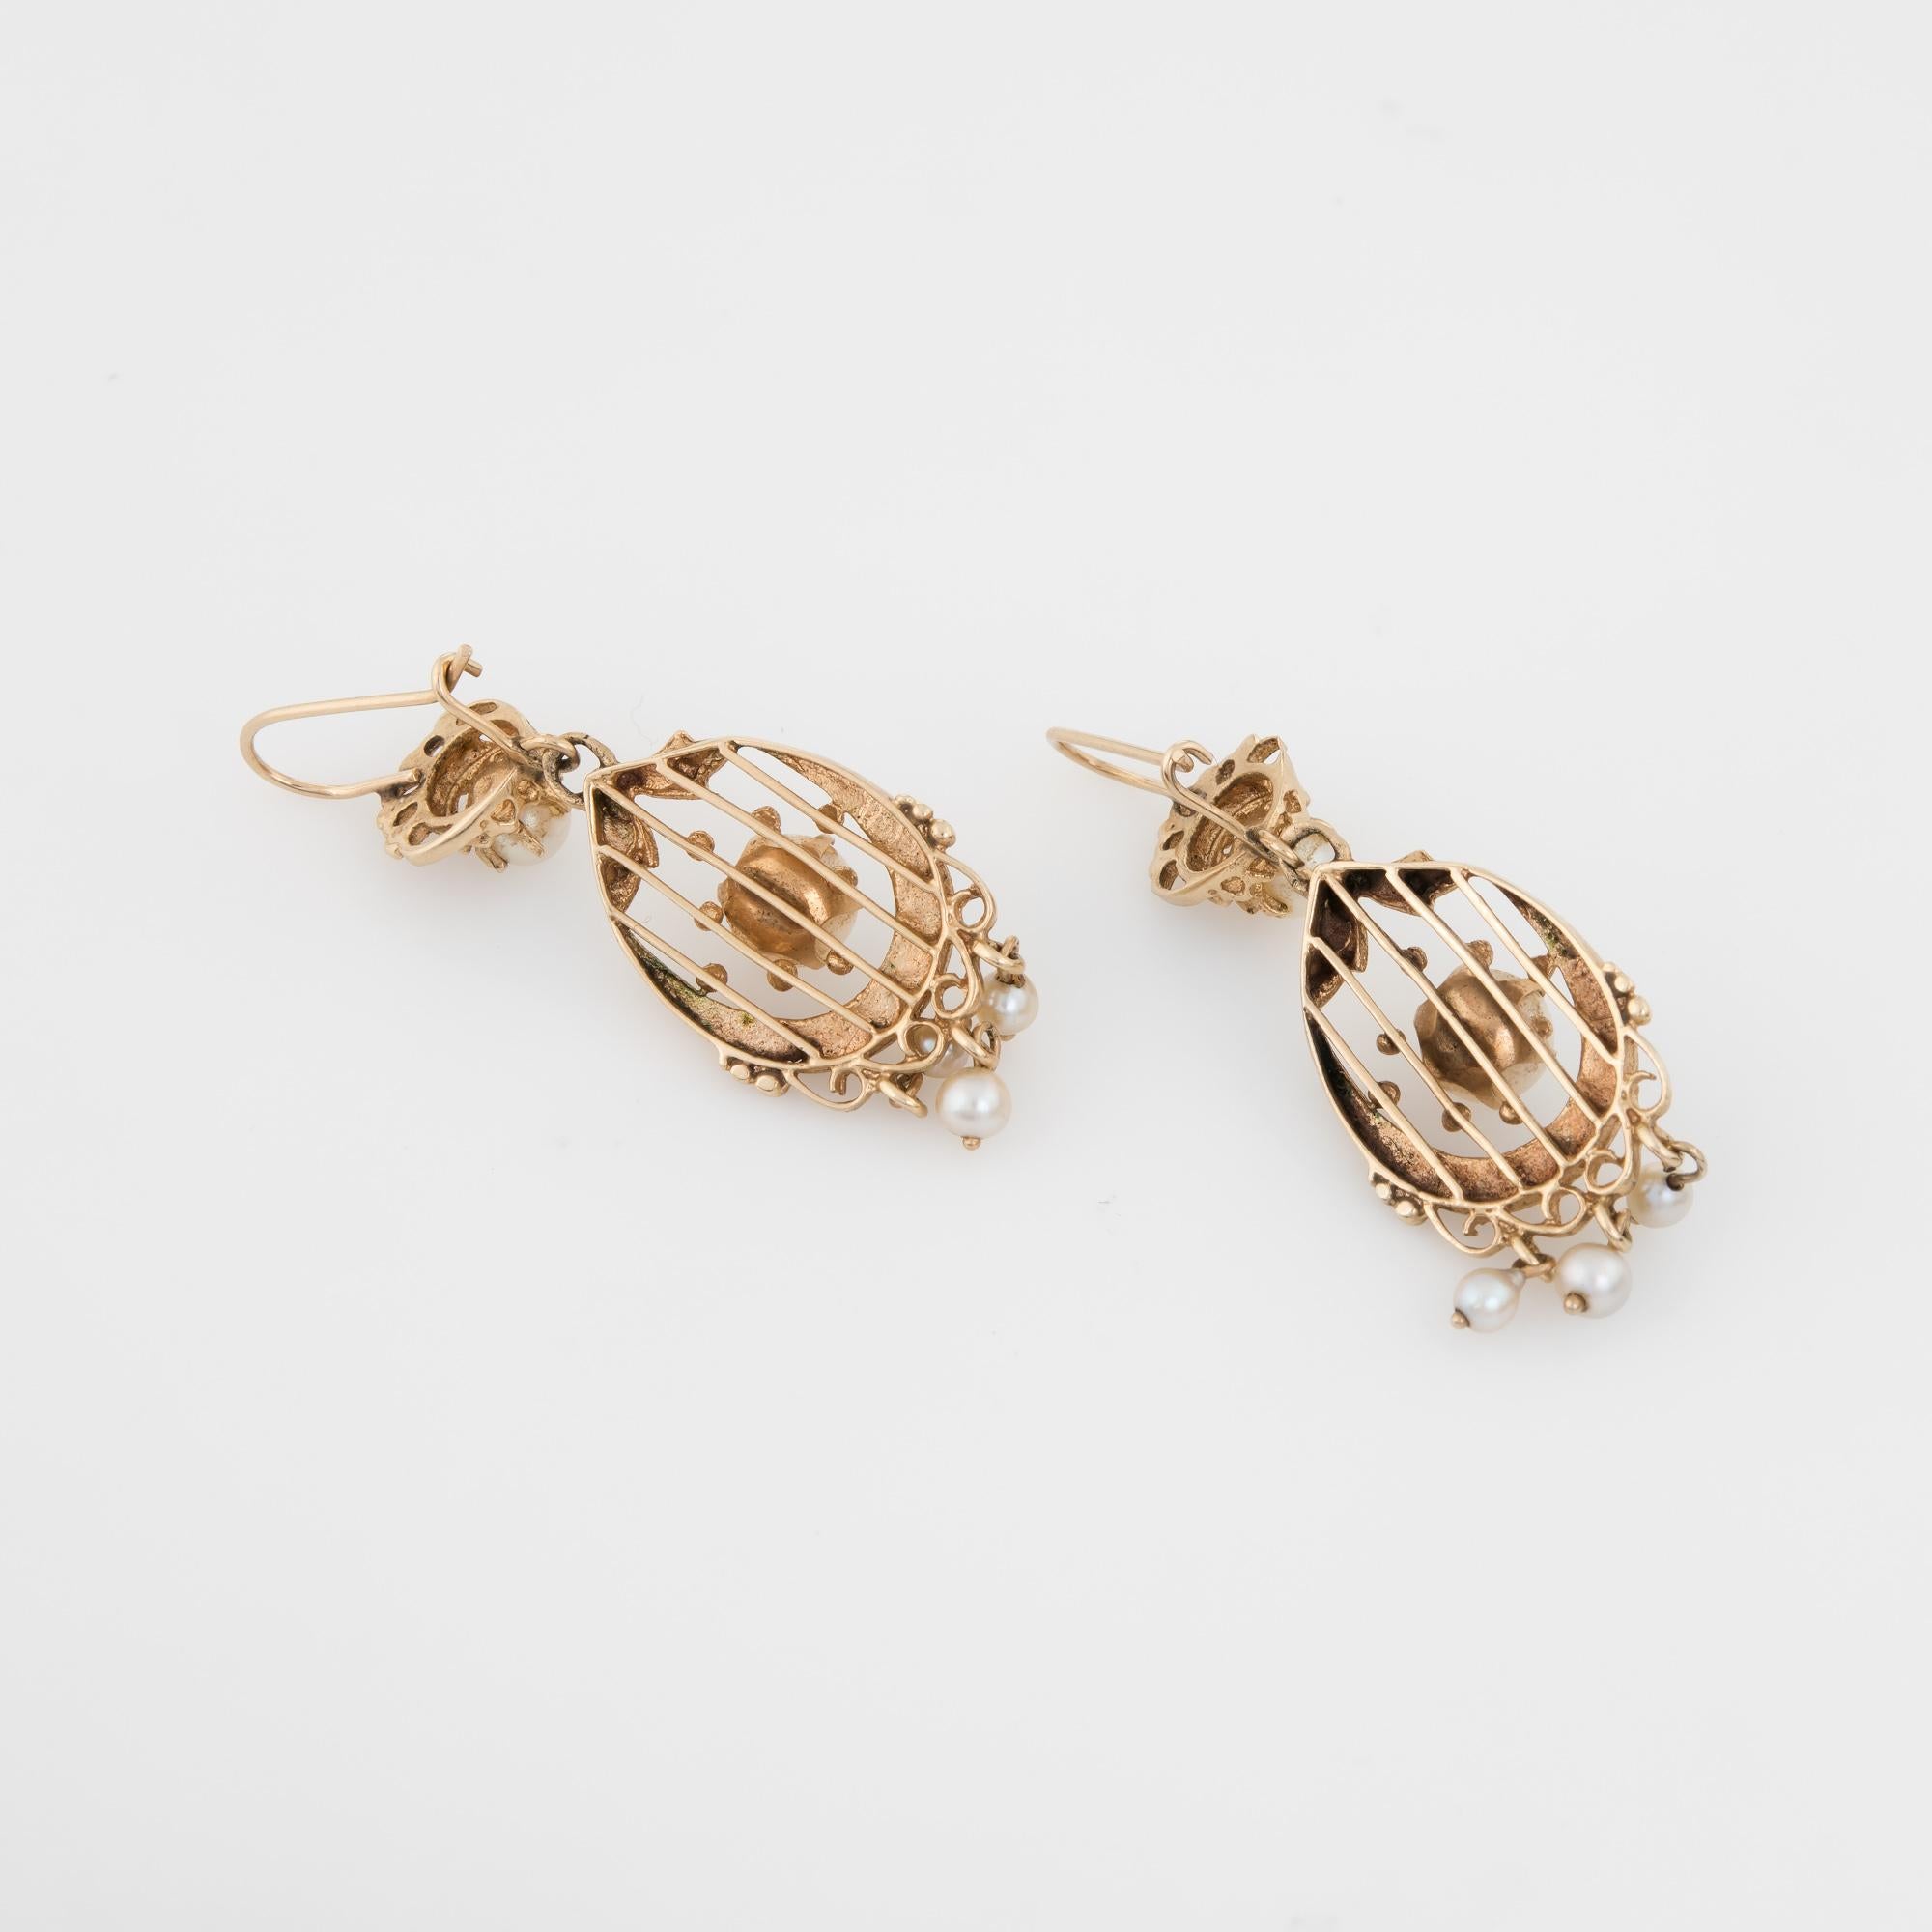 Finely detailed pair of vintage cultured pearl drop earrings, crafted in 14k yellow gold. 

A total of 10 cultured pearls range in size from 2.75mm (6) to 4.5mm (2) and 6mm (2).  

The charming earrings feature an ornate design with a fringe of